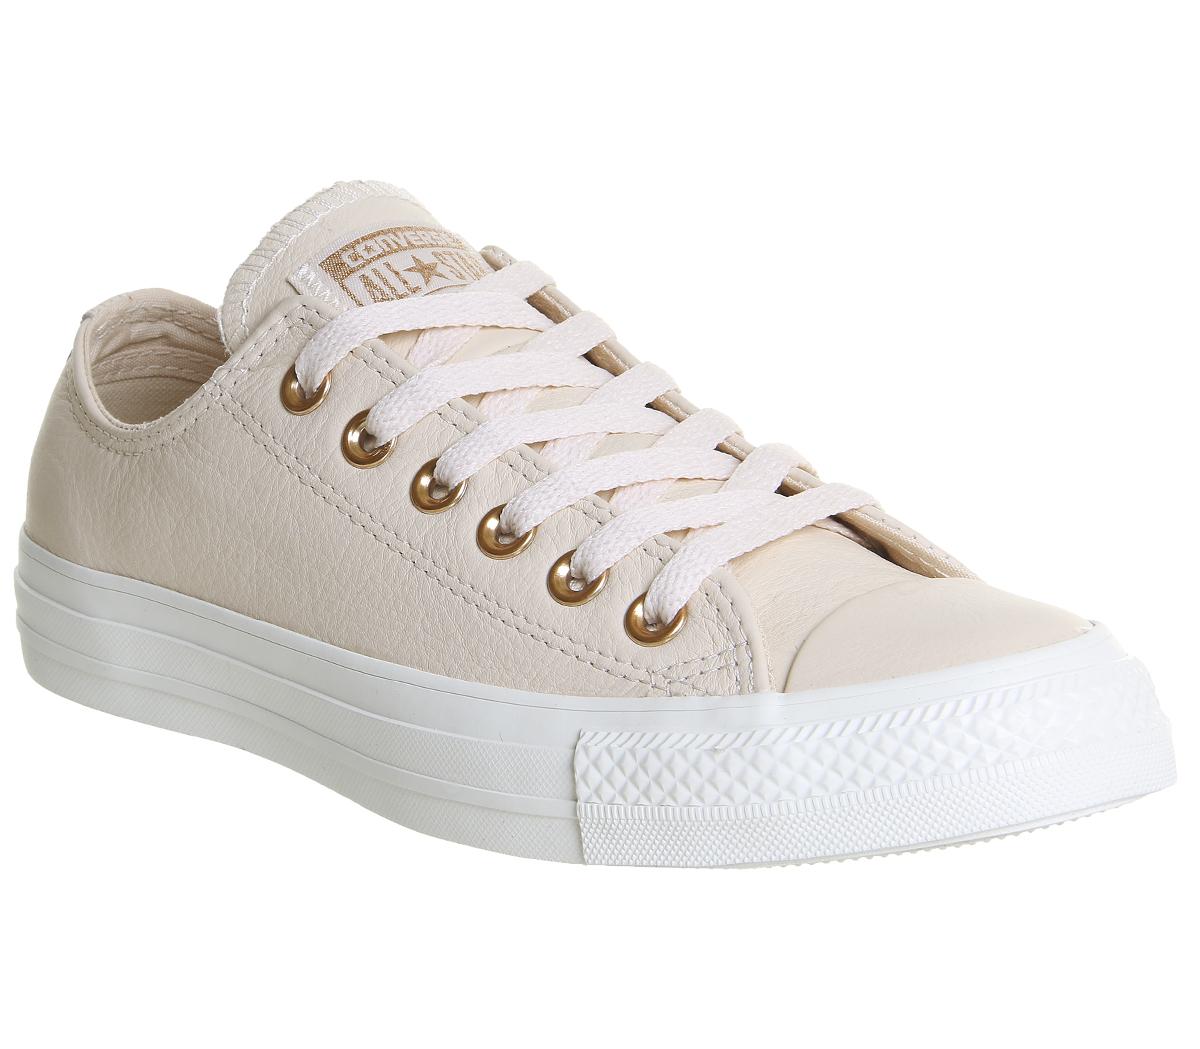 converse all star low leather pastel rose tan rose gold